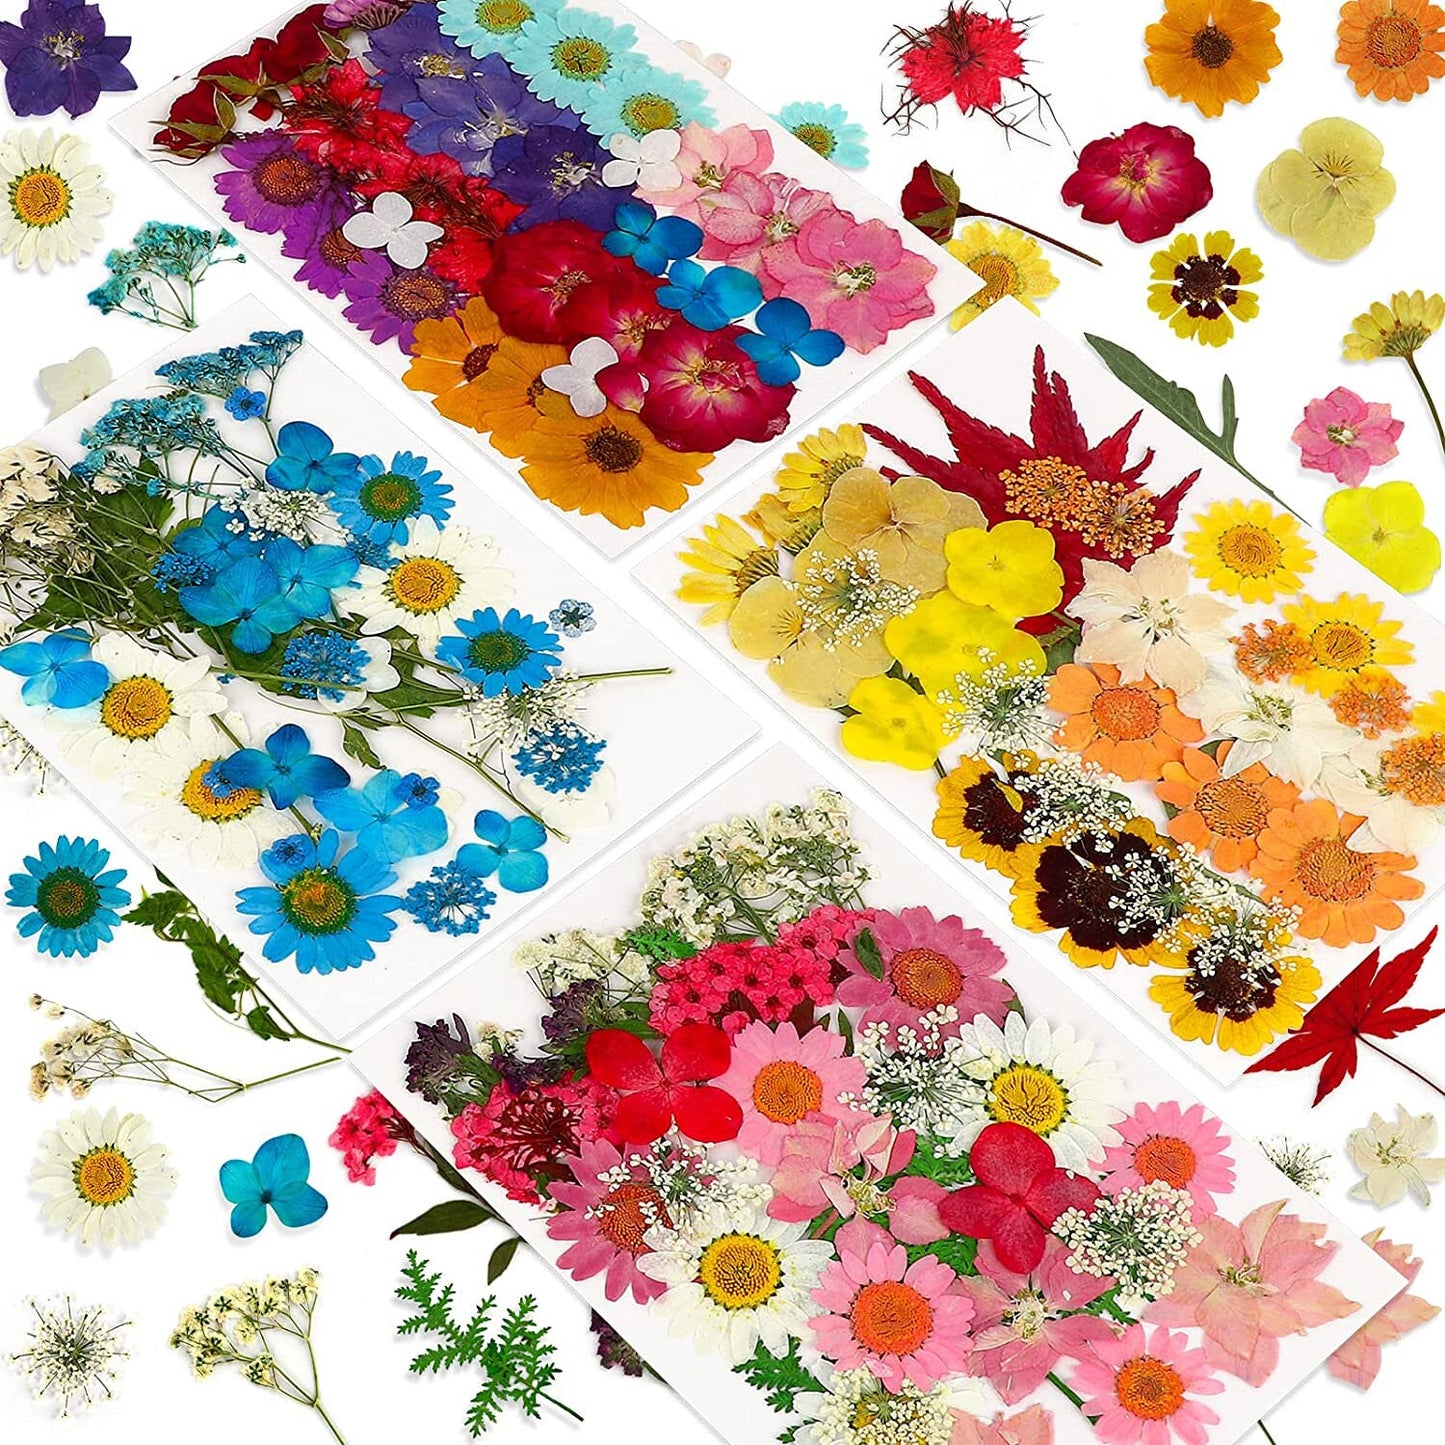 Dried Flowers - Whole Dried Flowers for Resin and Soaps - 146 pcs